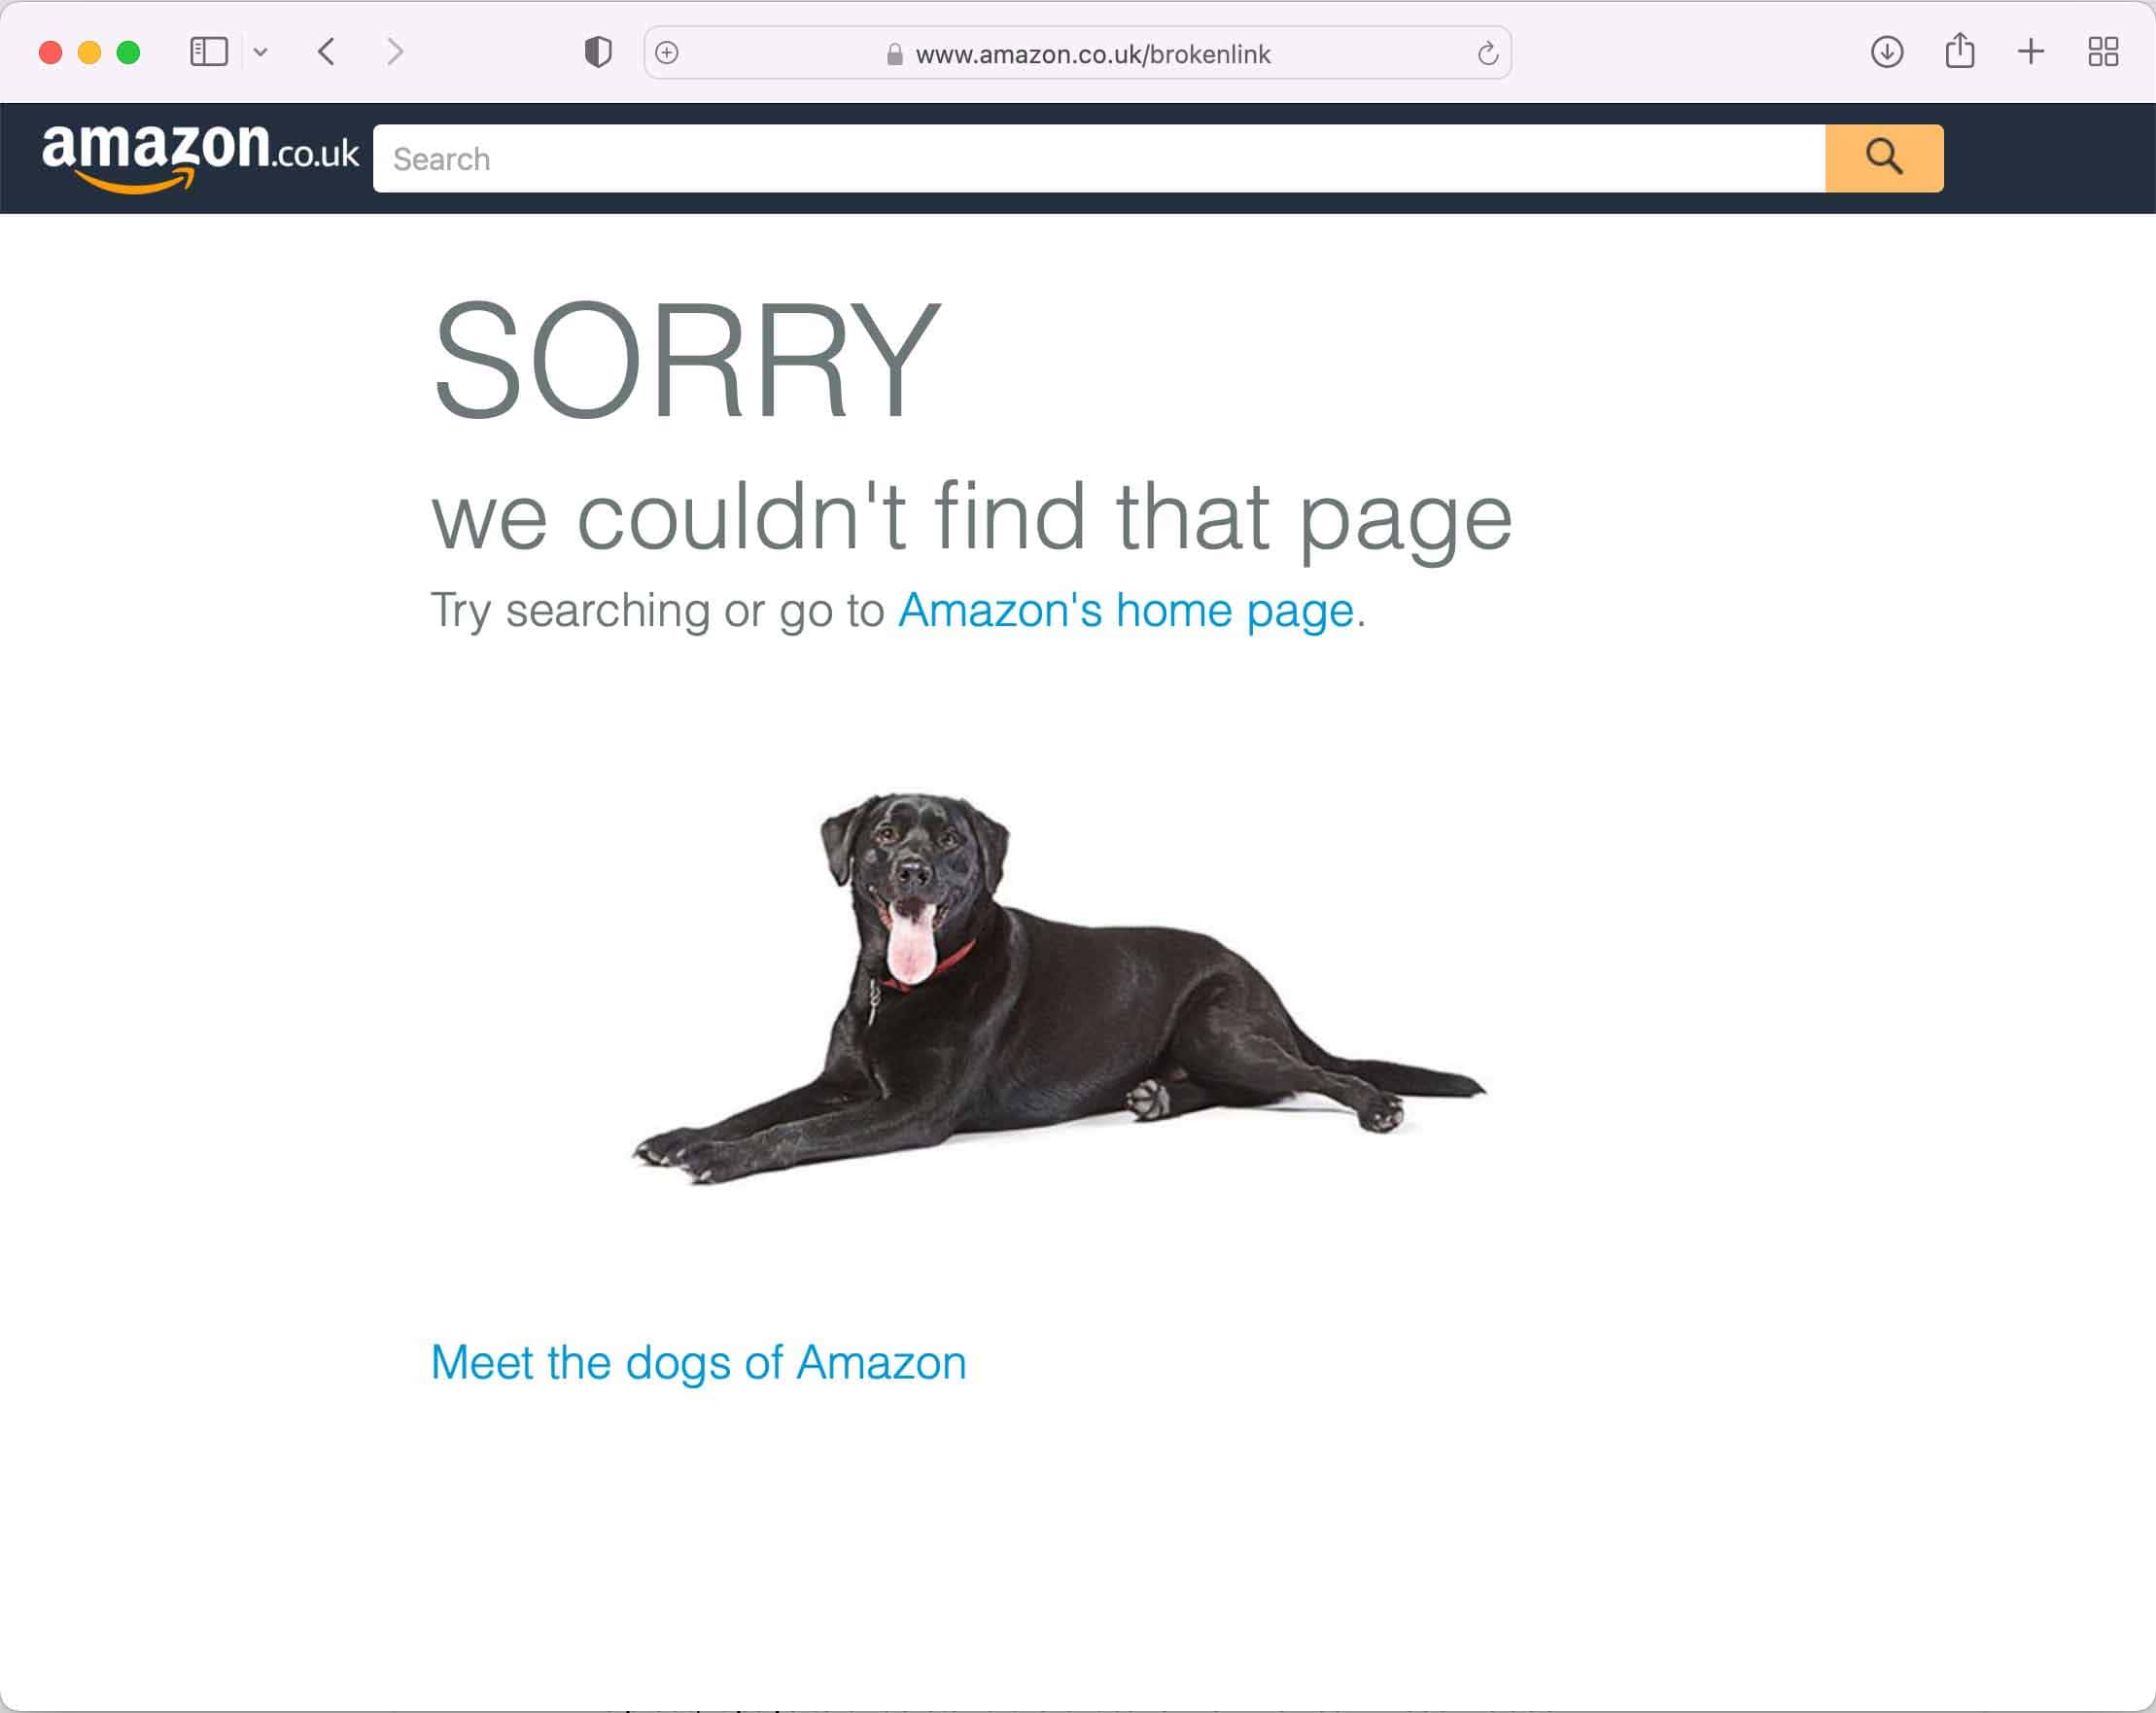 Amazon's 404 page